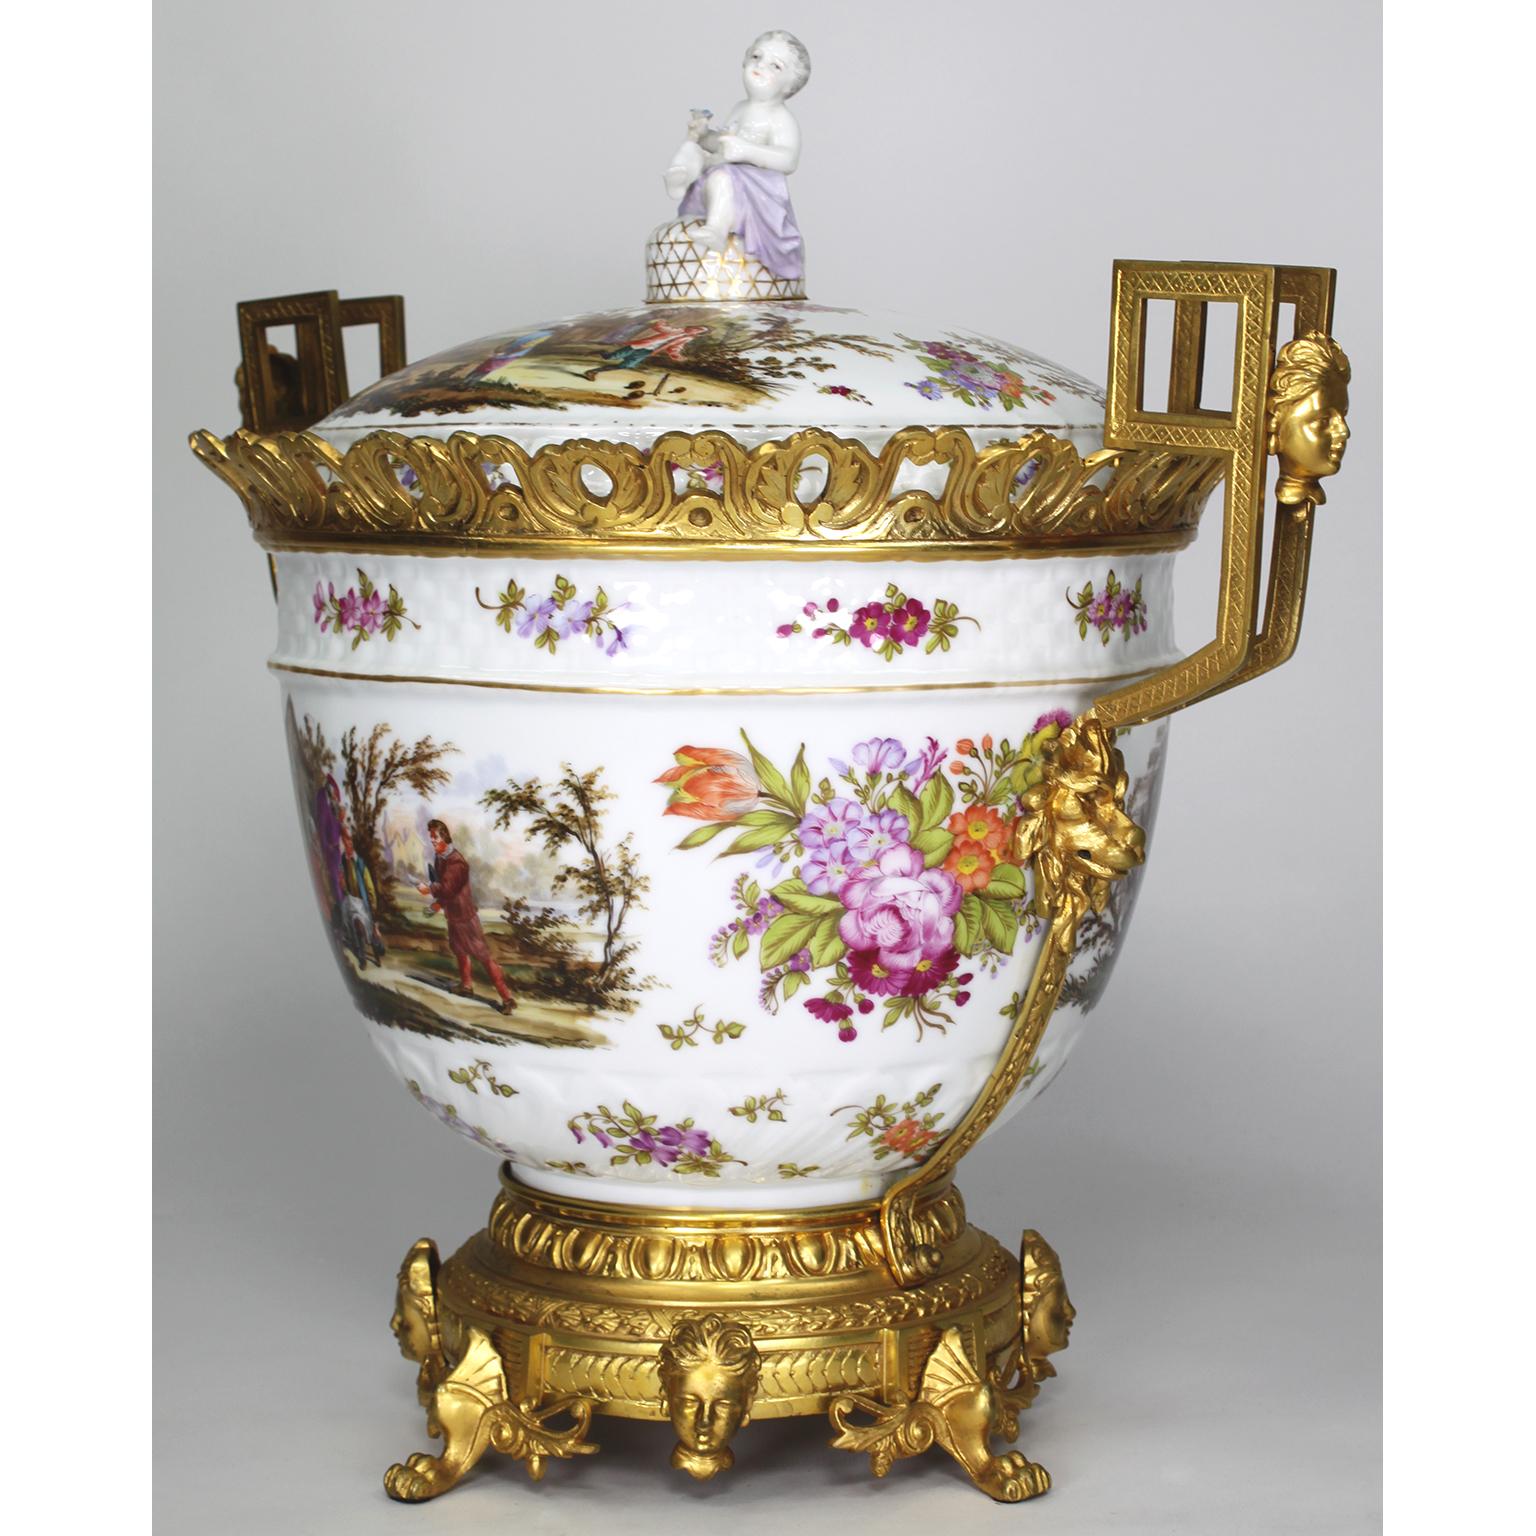 A Large German 19th/20th century Figural Porcelain and Gilt-Bronze Mounted Urn with Cover in the Manner of Meissen. The ovoid porcelain hand painted urn decorated with scenes of festive villagers and elders. The lid also decorated with festive